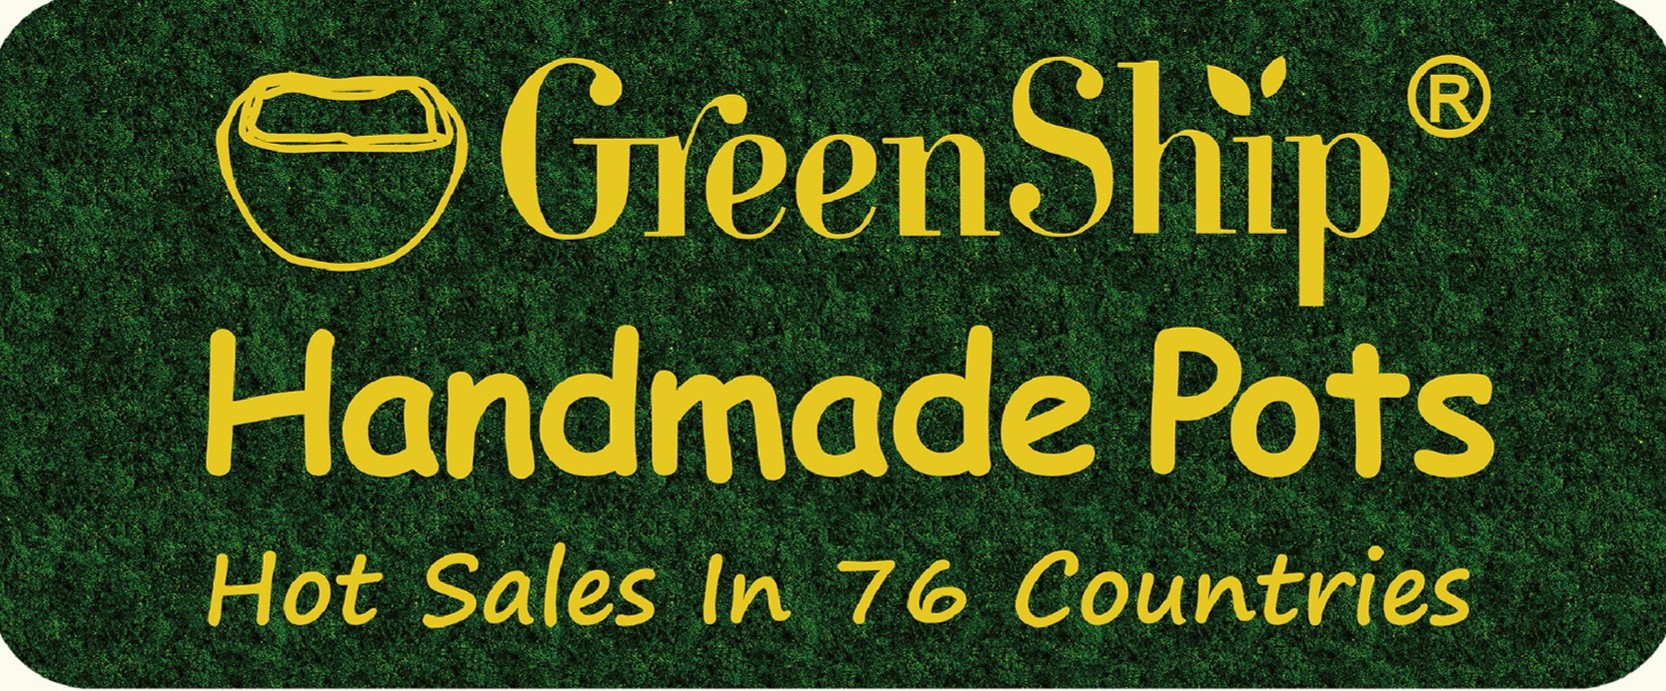 Greenship Garden Supplies logo with Yellow font on a green background.